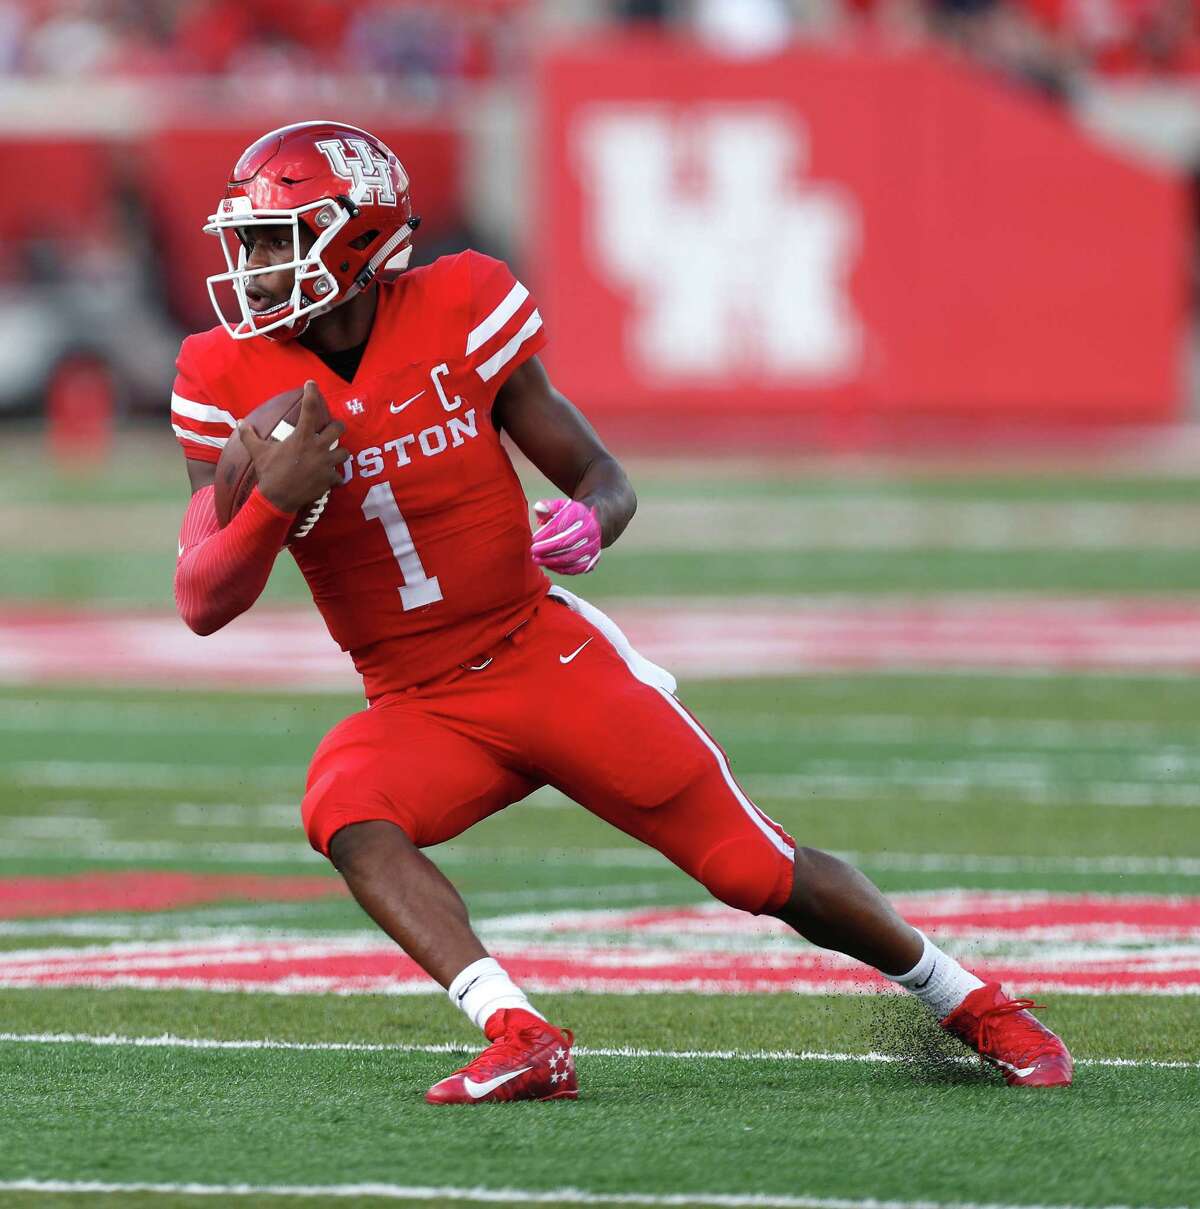 Houston Cougars quarterback Greg Ward Jr. (1) runs the ball during the second quarter of a college football game at TDECU Stadium, Saturday,Oct. 29, 2016 in Houston.